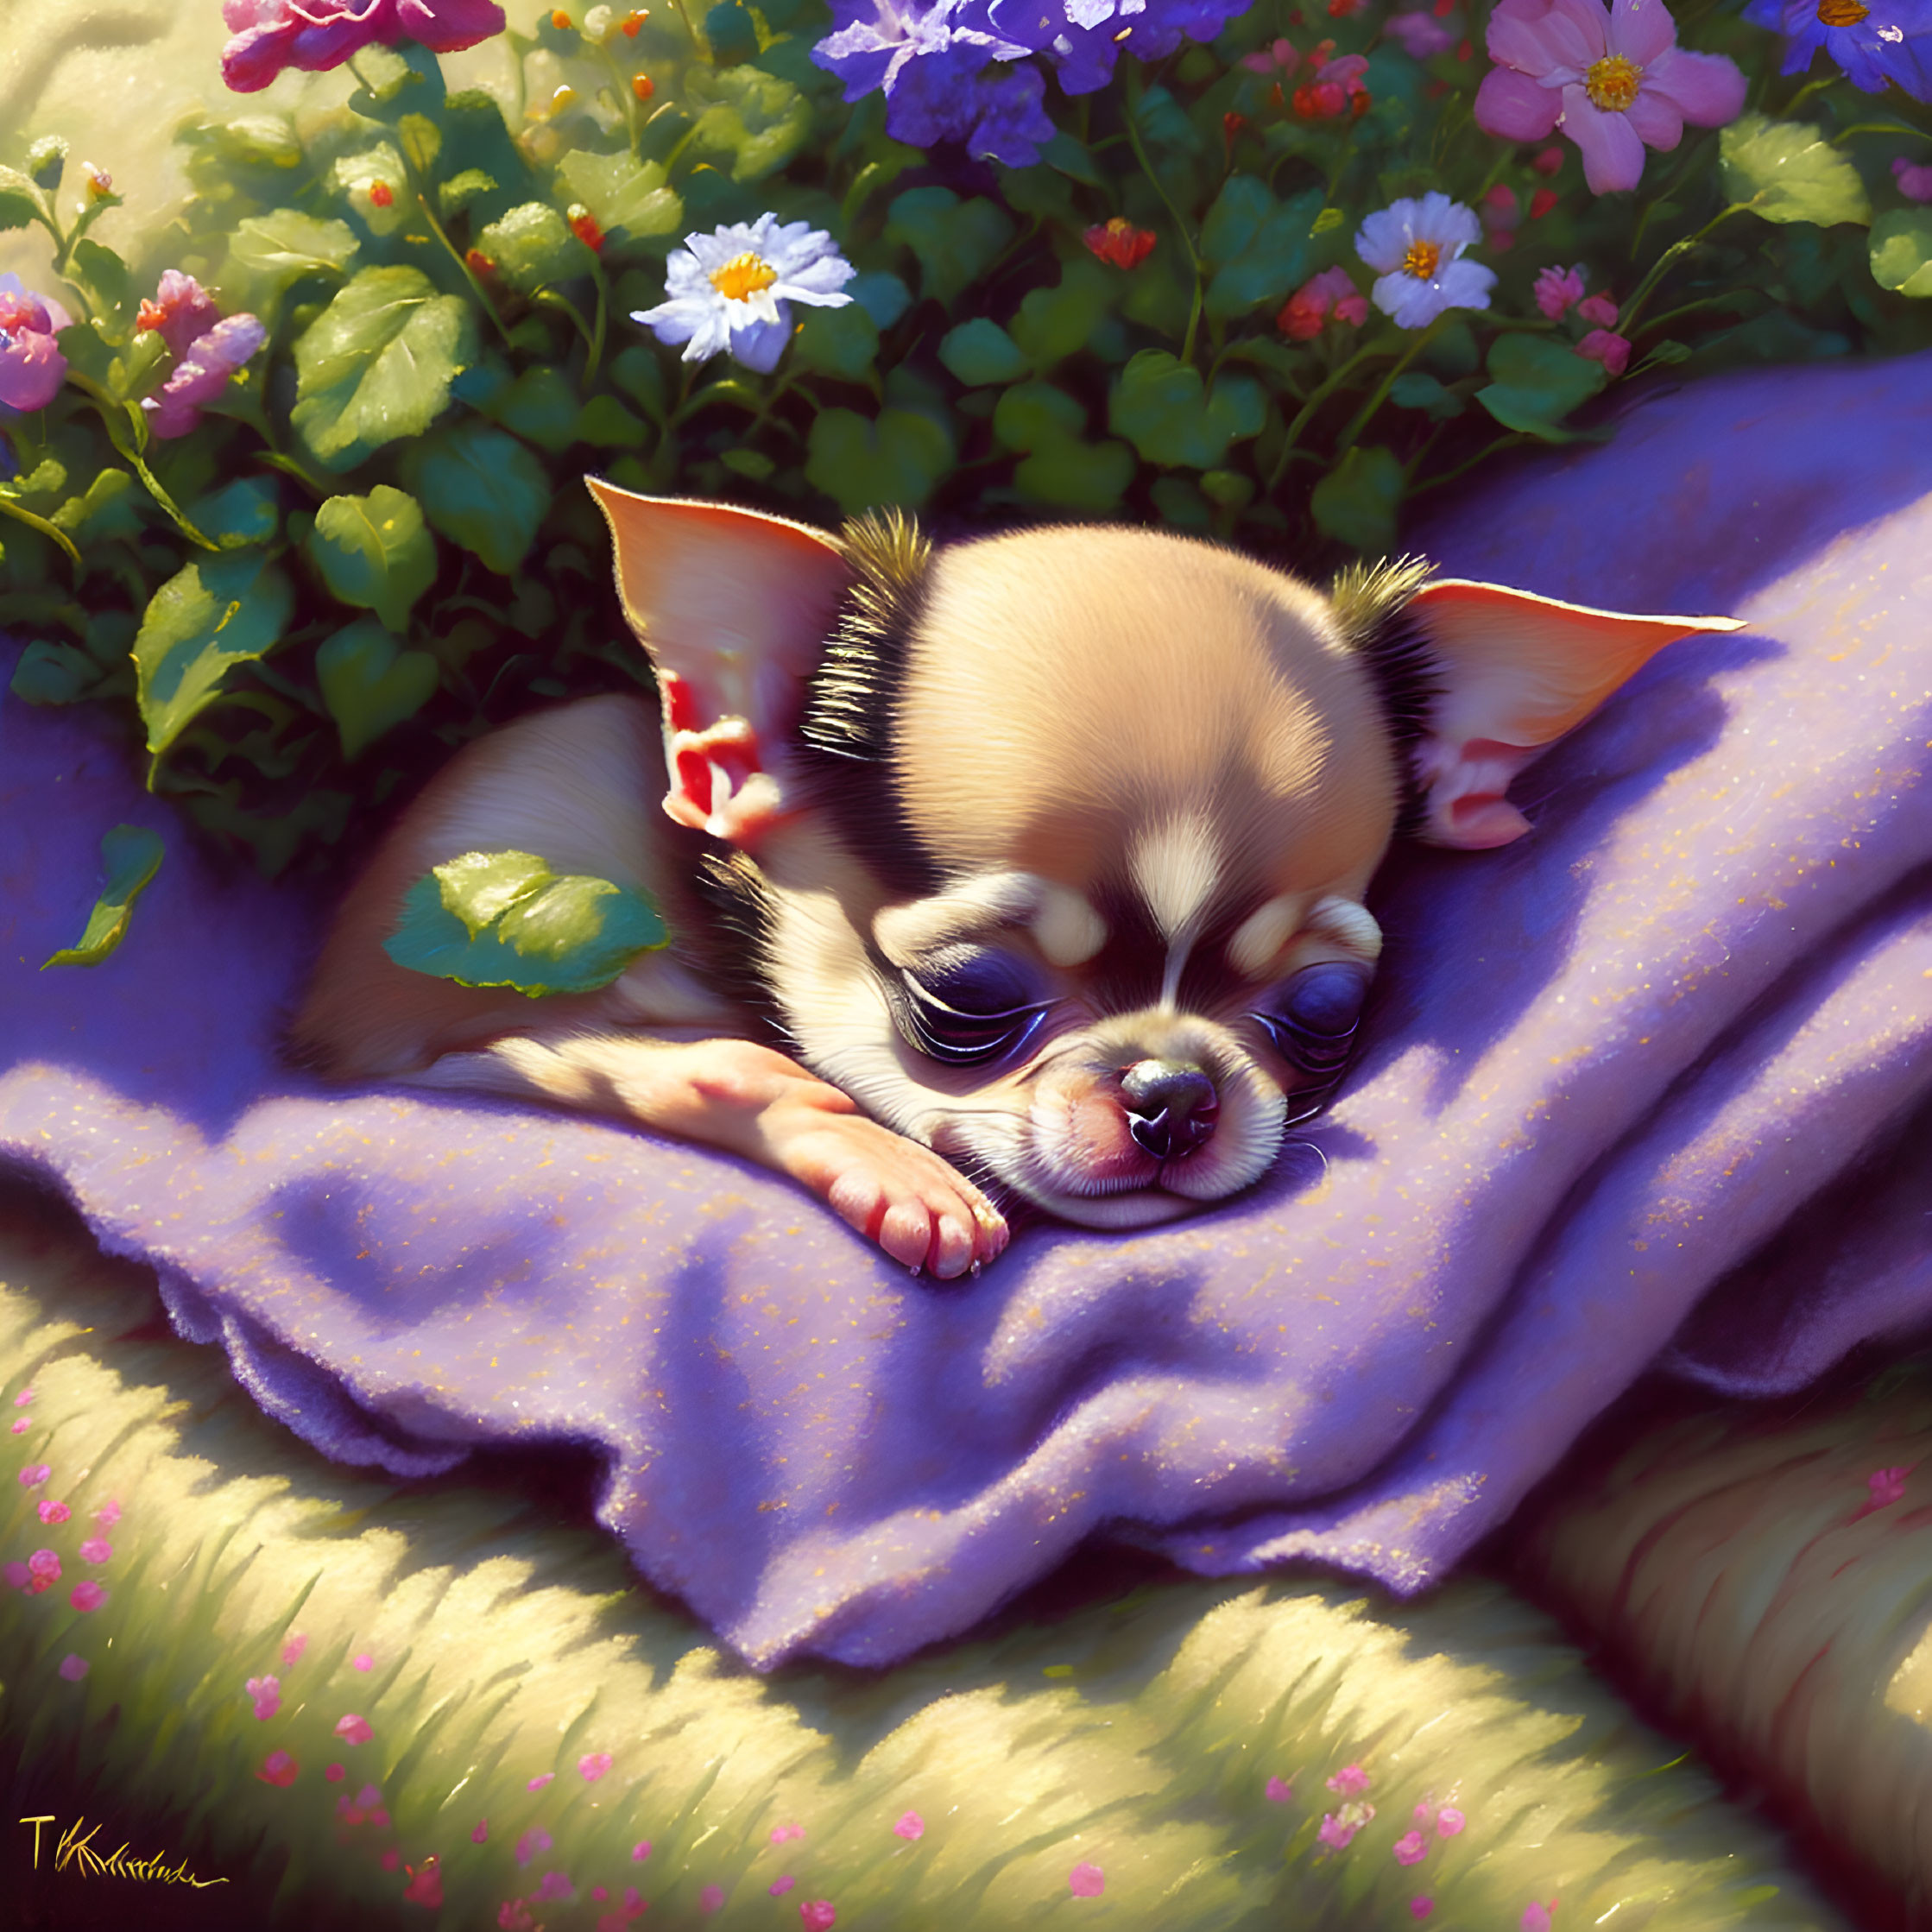 Chihuahua puppy on purple blanket surrounded by garden flowers